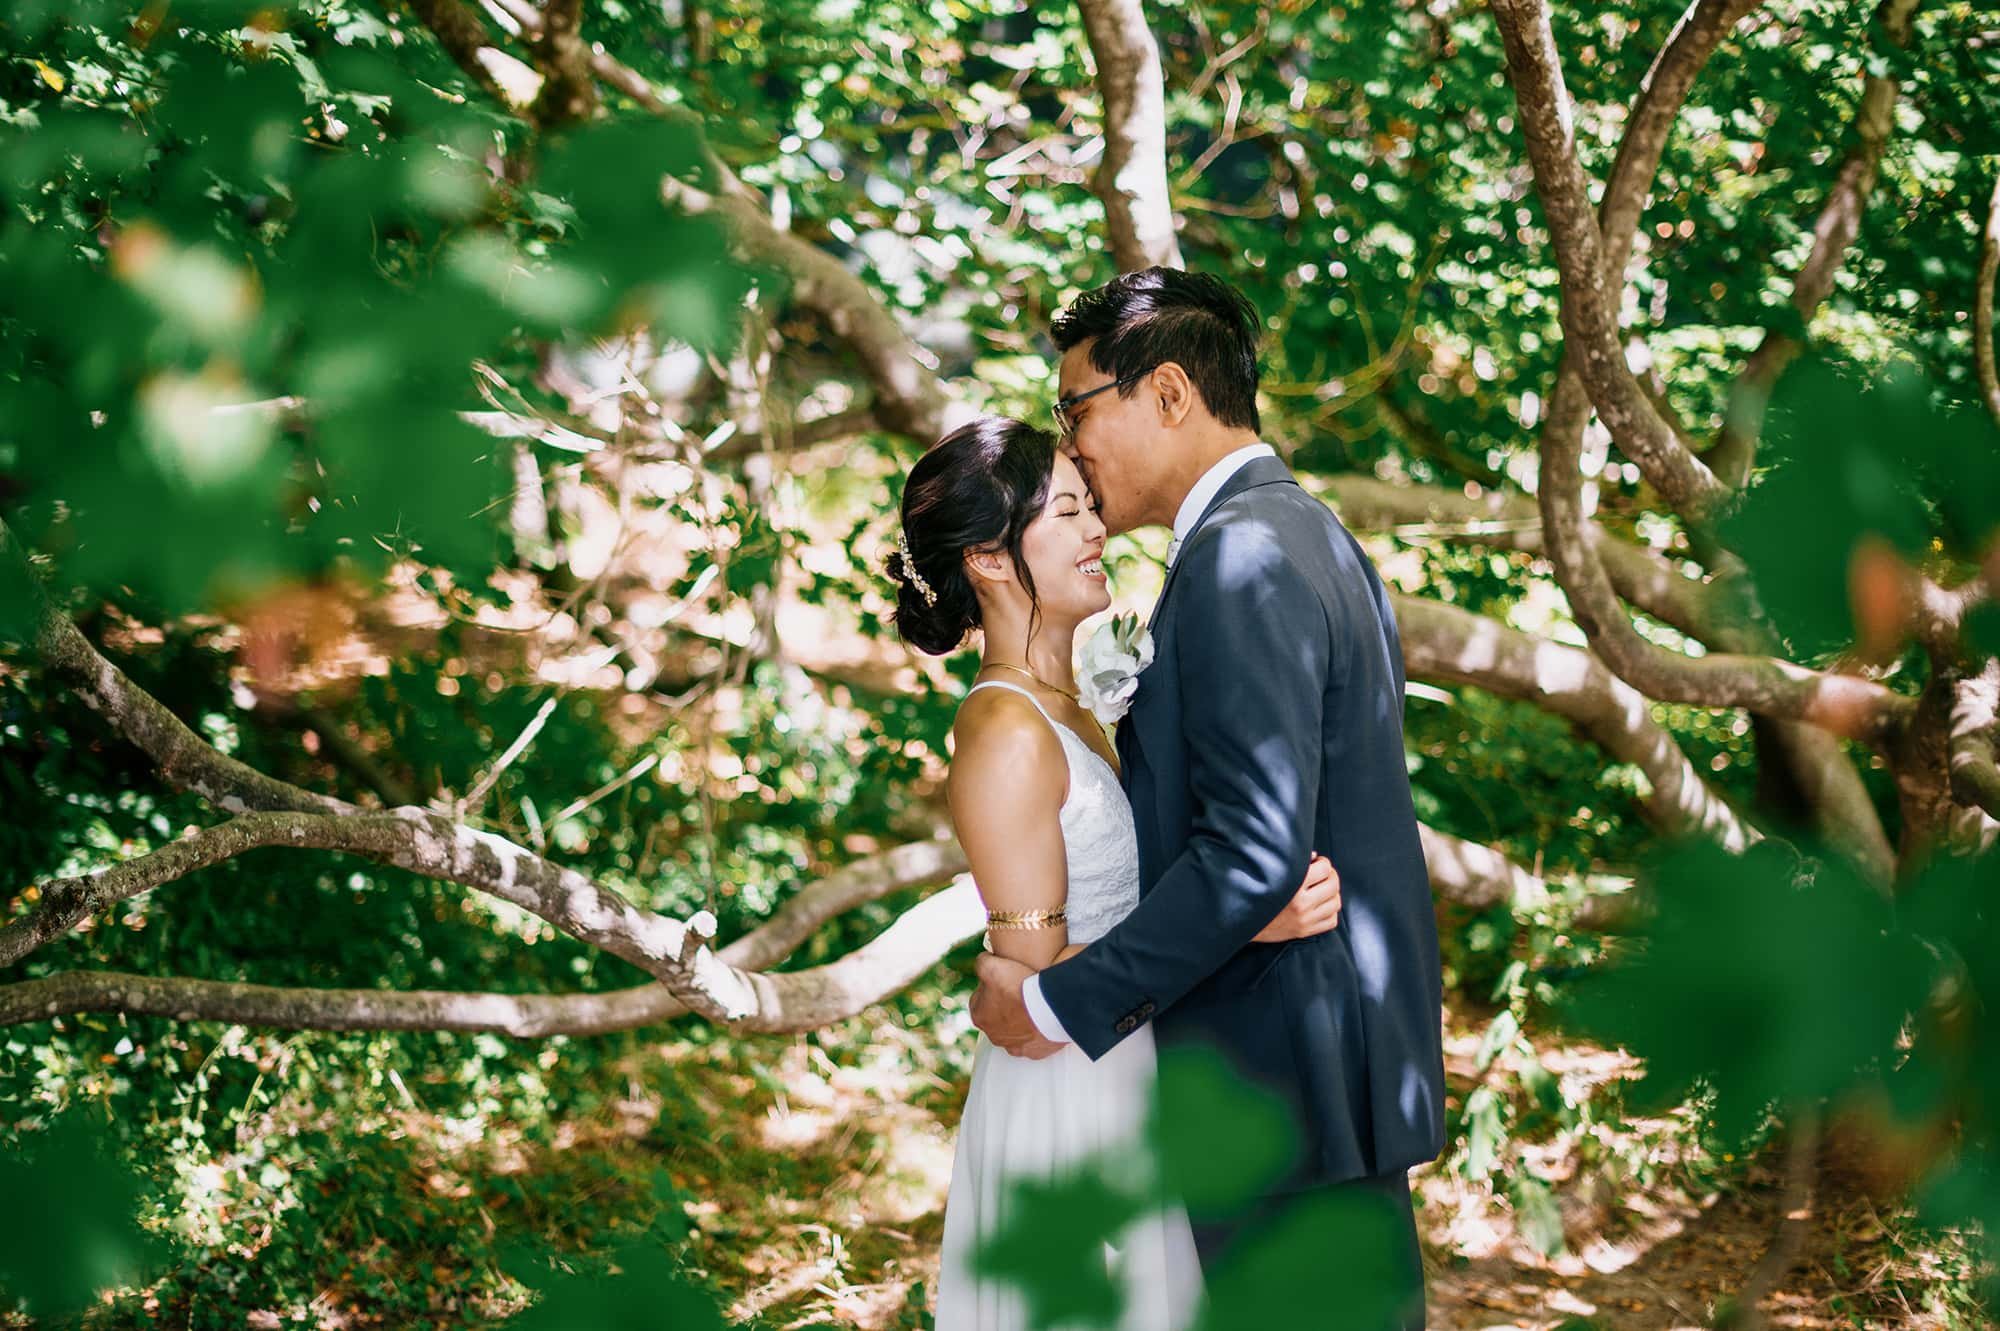 Groom kissing bride on forehead surrounded by trees